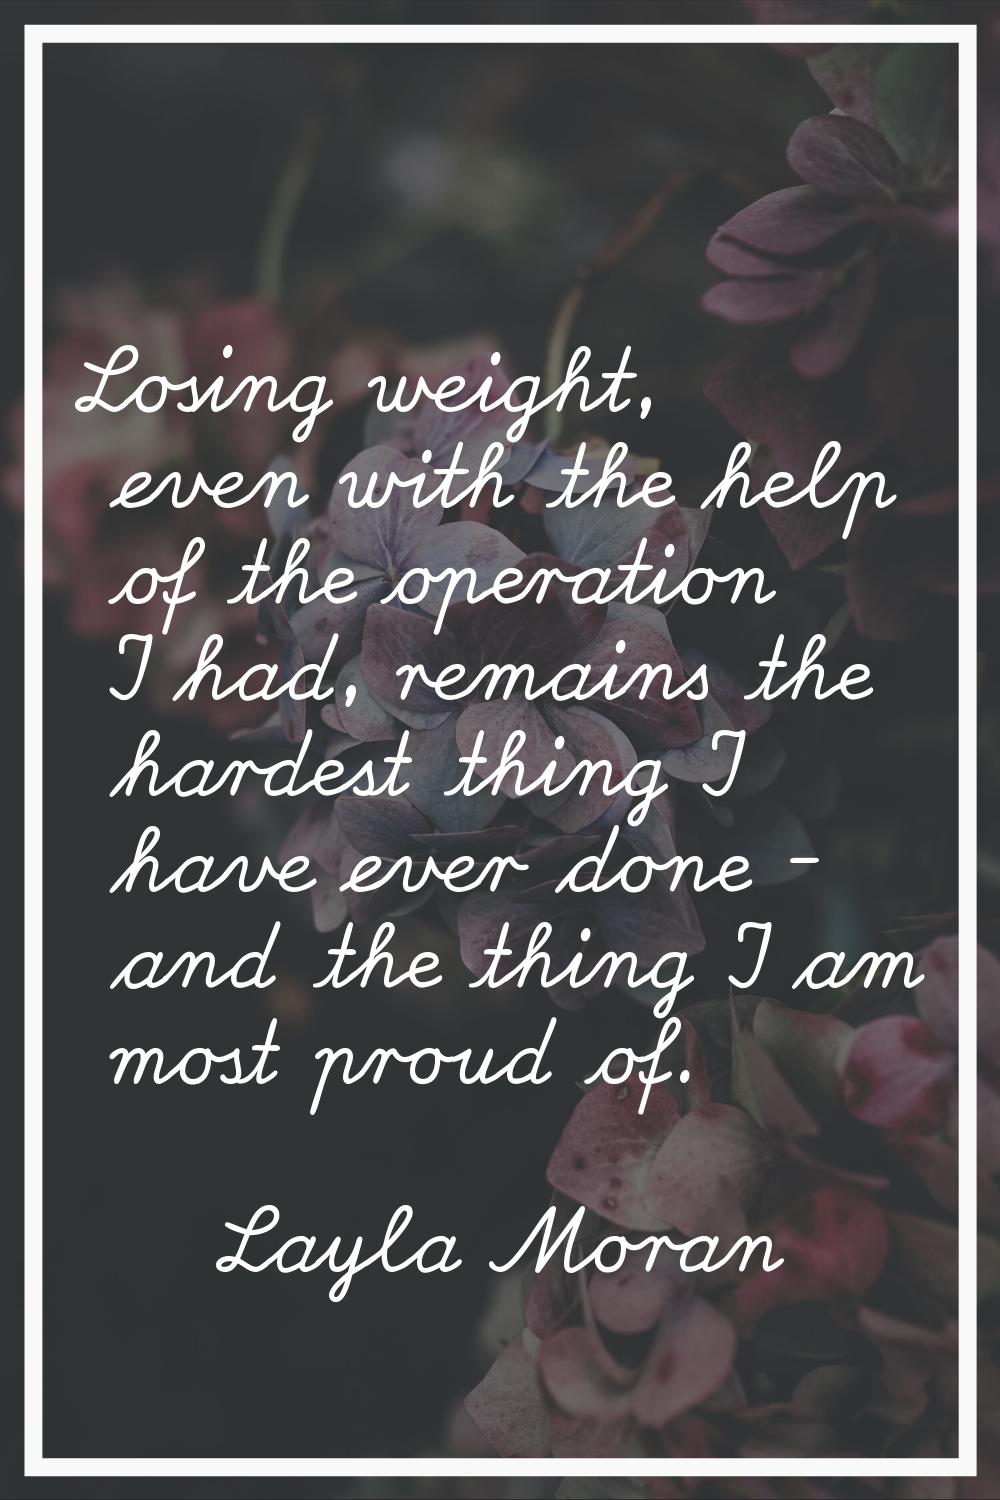 Losing weight, even with the help of the operation I had, remains the hardest thing I have ever don